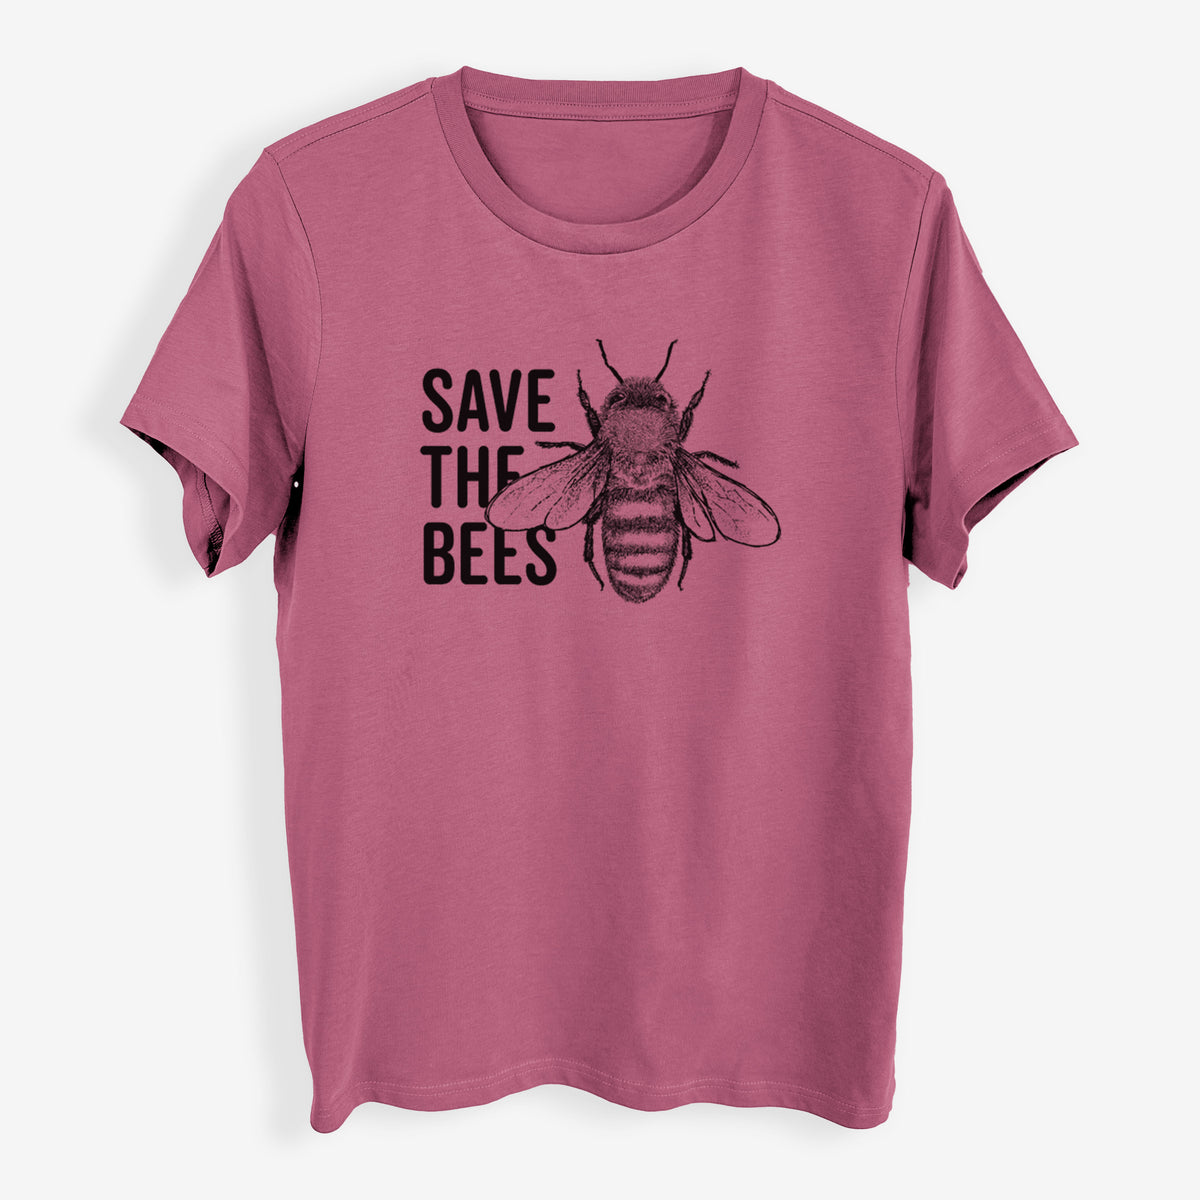 Save the Bees - Womens Everyday Maple Tee